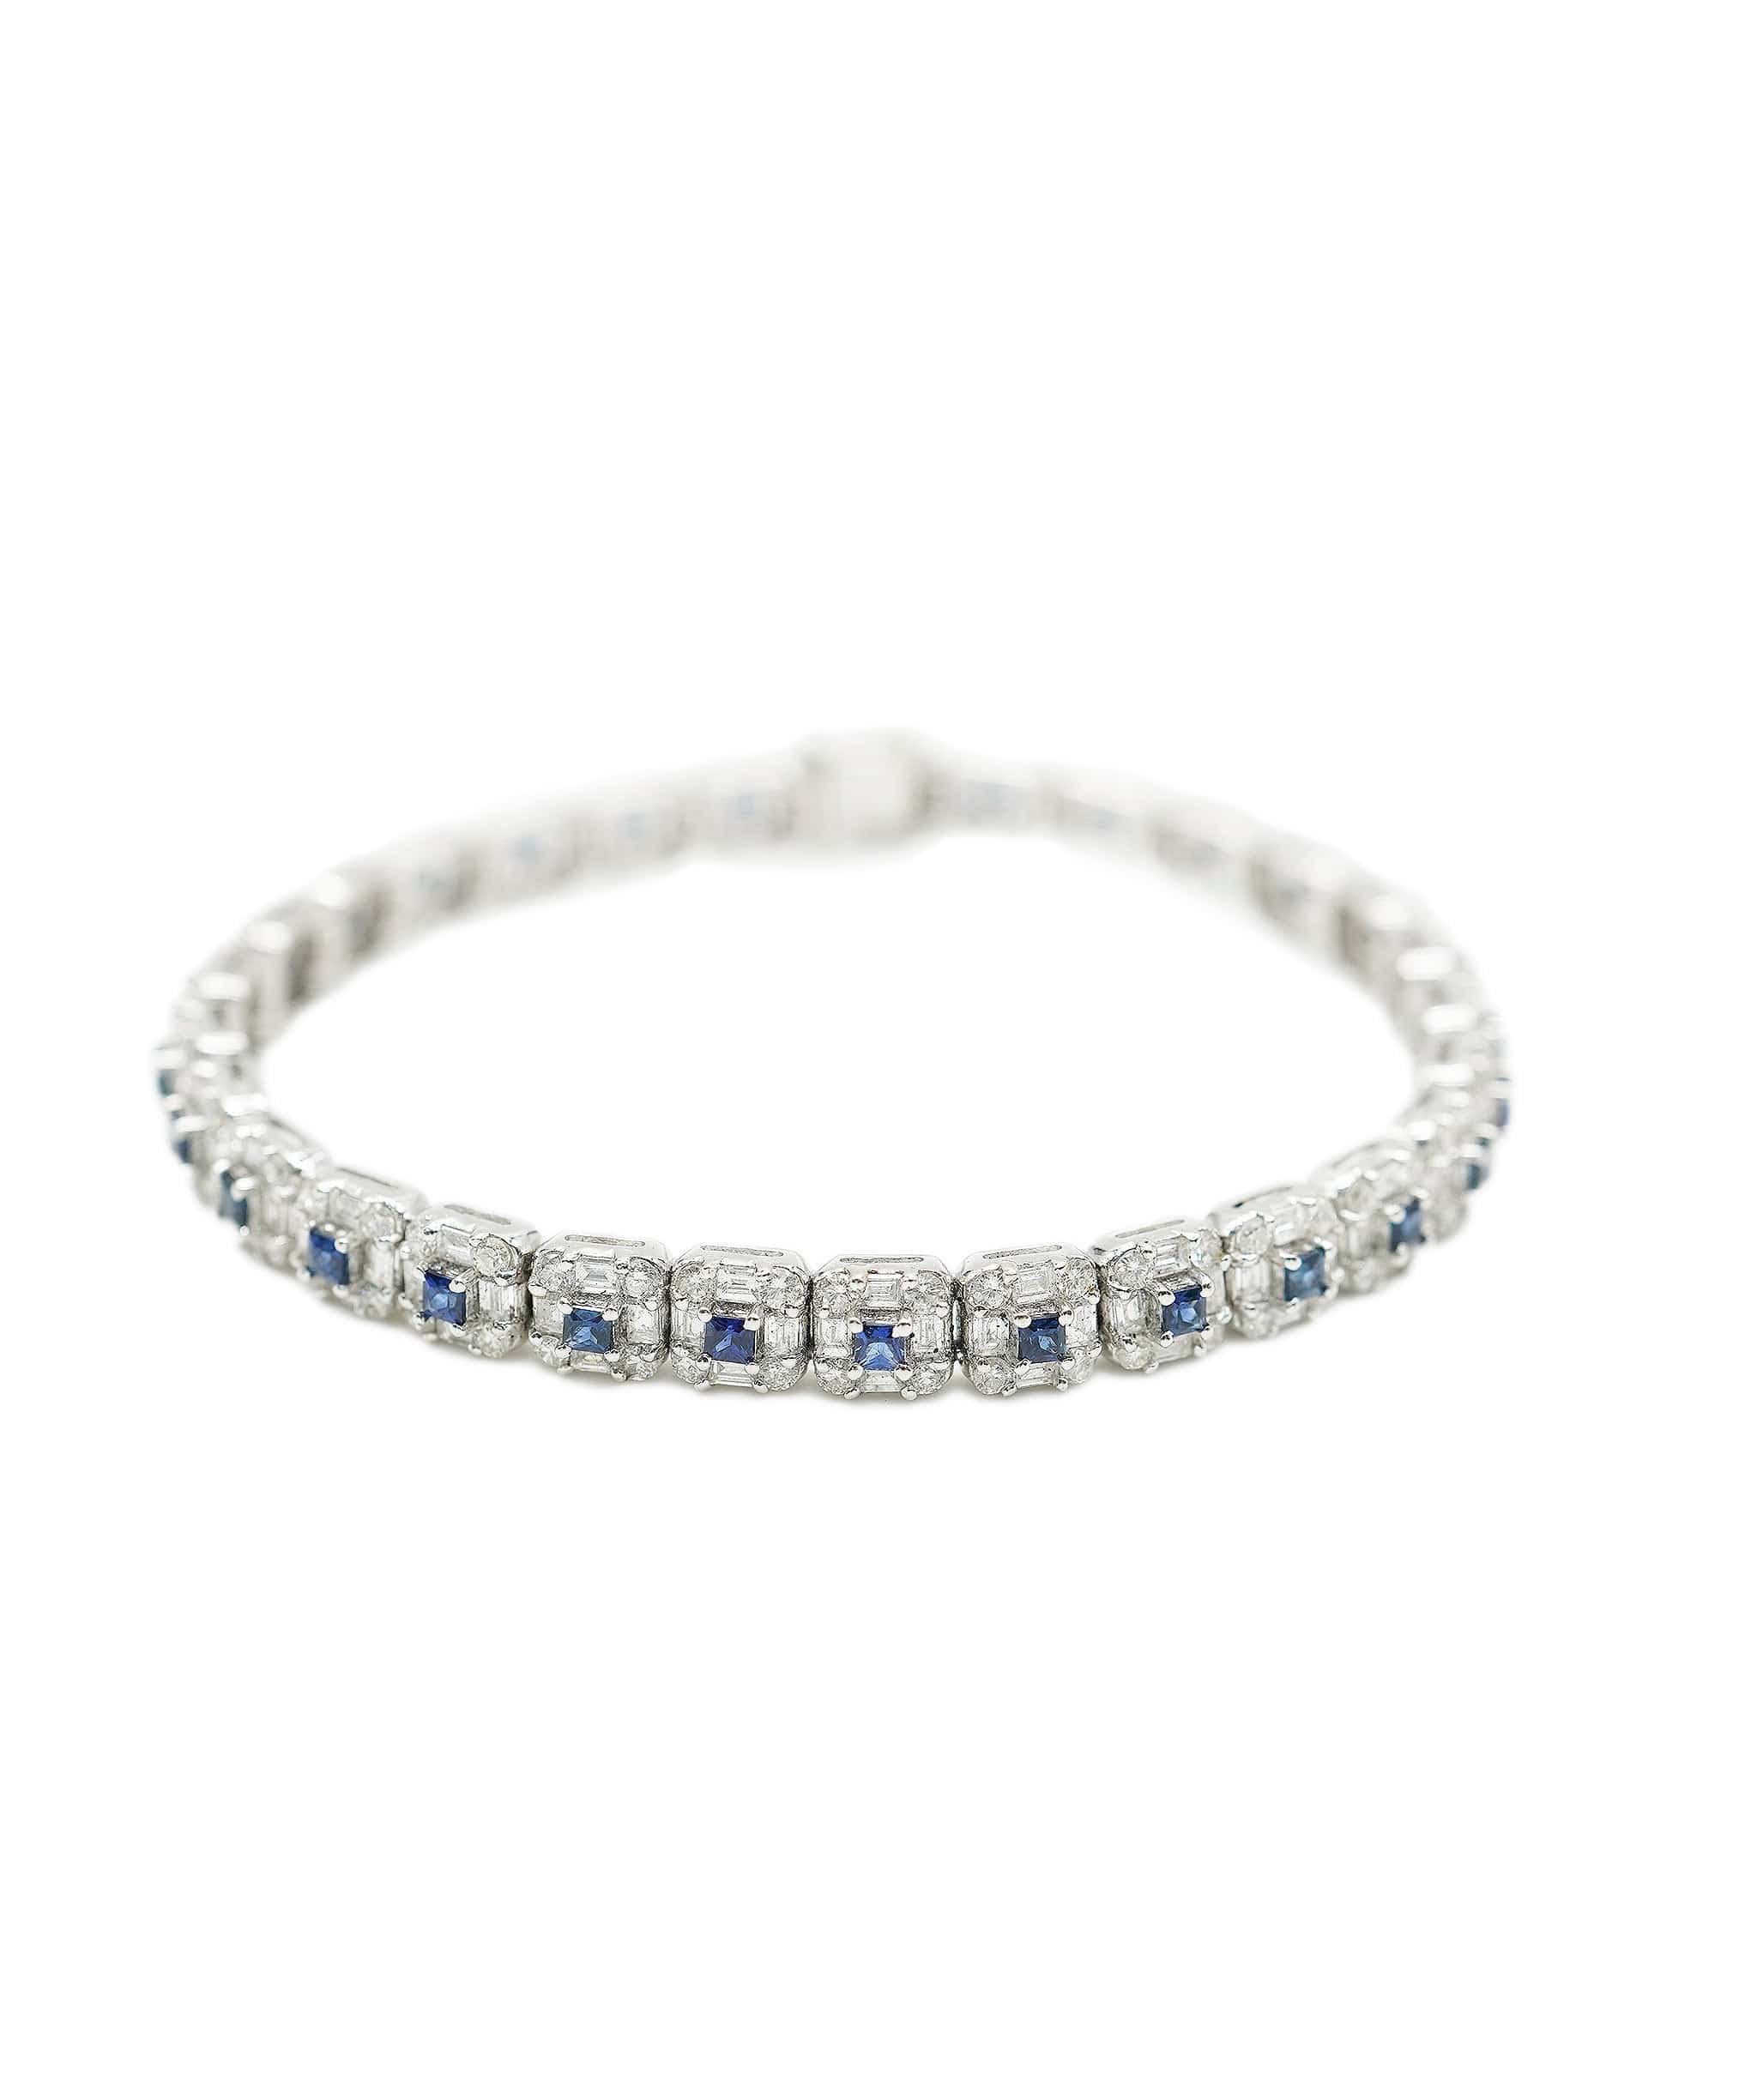 Luxury Promise Diamond apx 5.05cts and sapphire apx. 1.90cts total line bracelet AHC1515